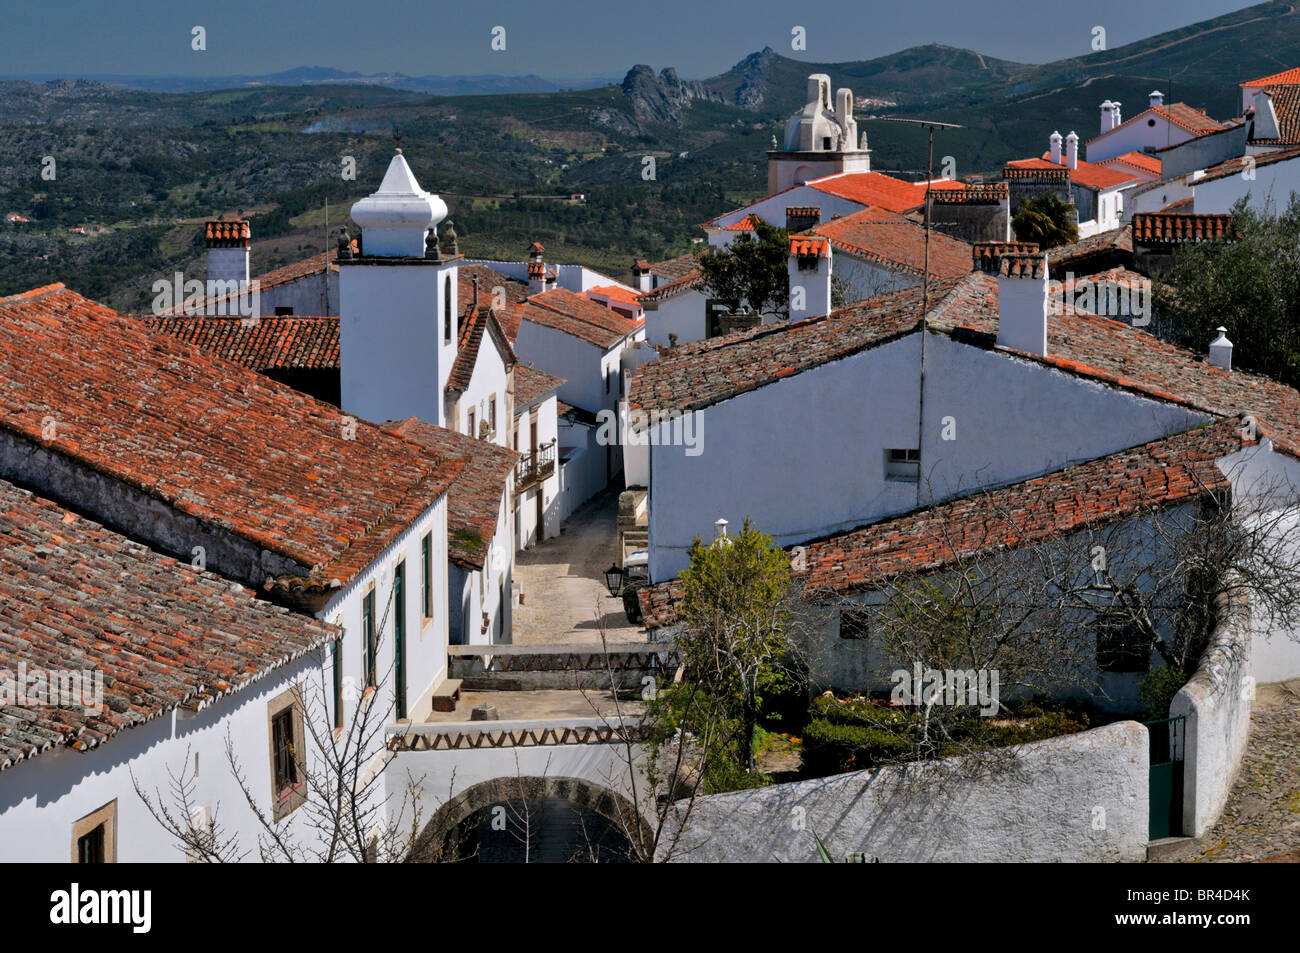 Portugal, Alentejo: View to the historic village of Marvao and the Serra de Sao Mamede in the background Stock Photo